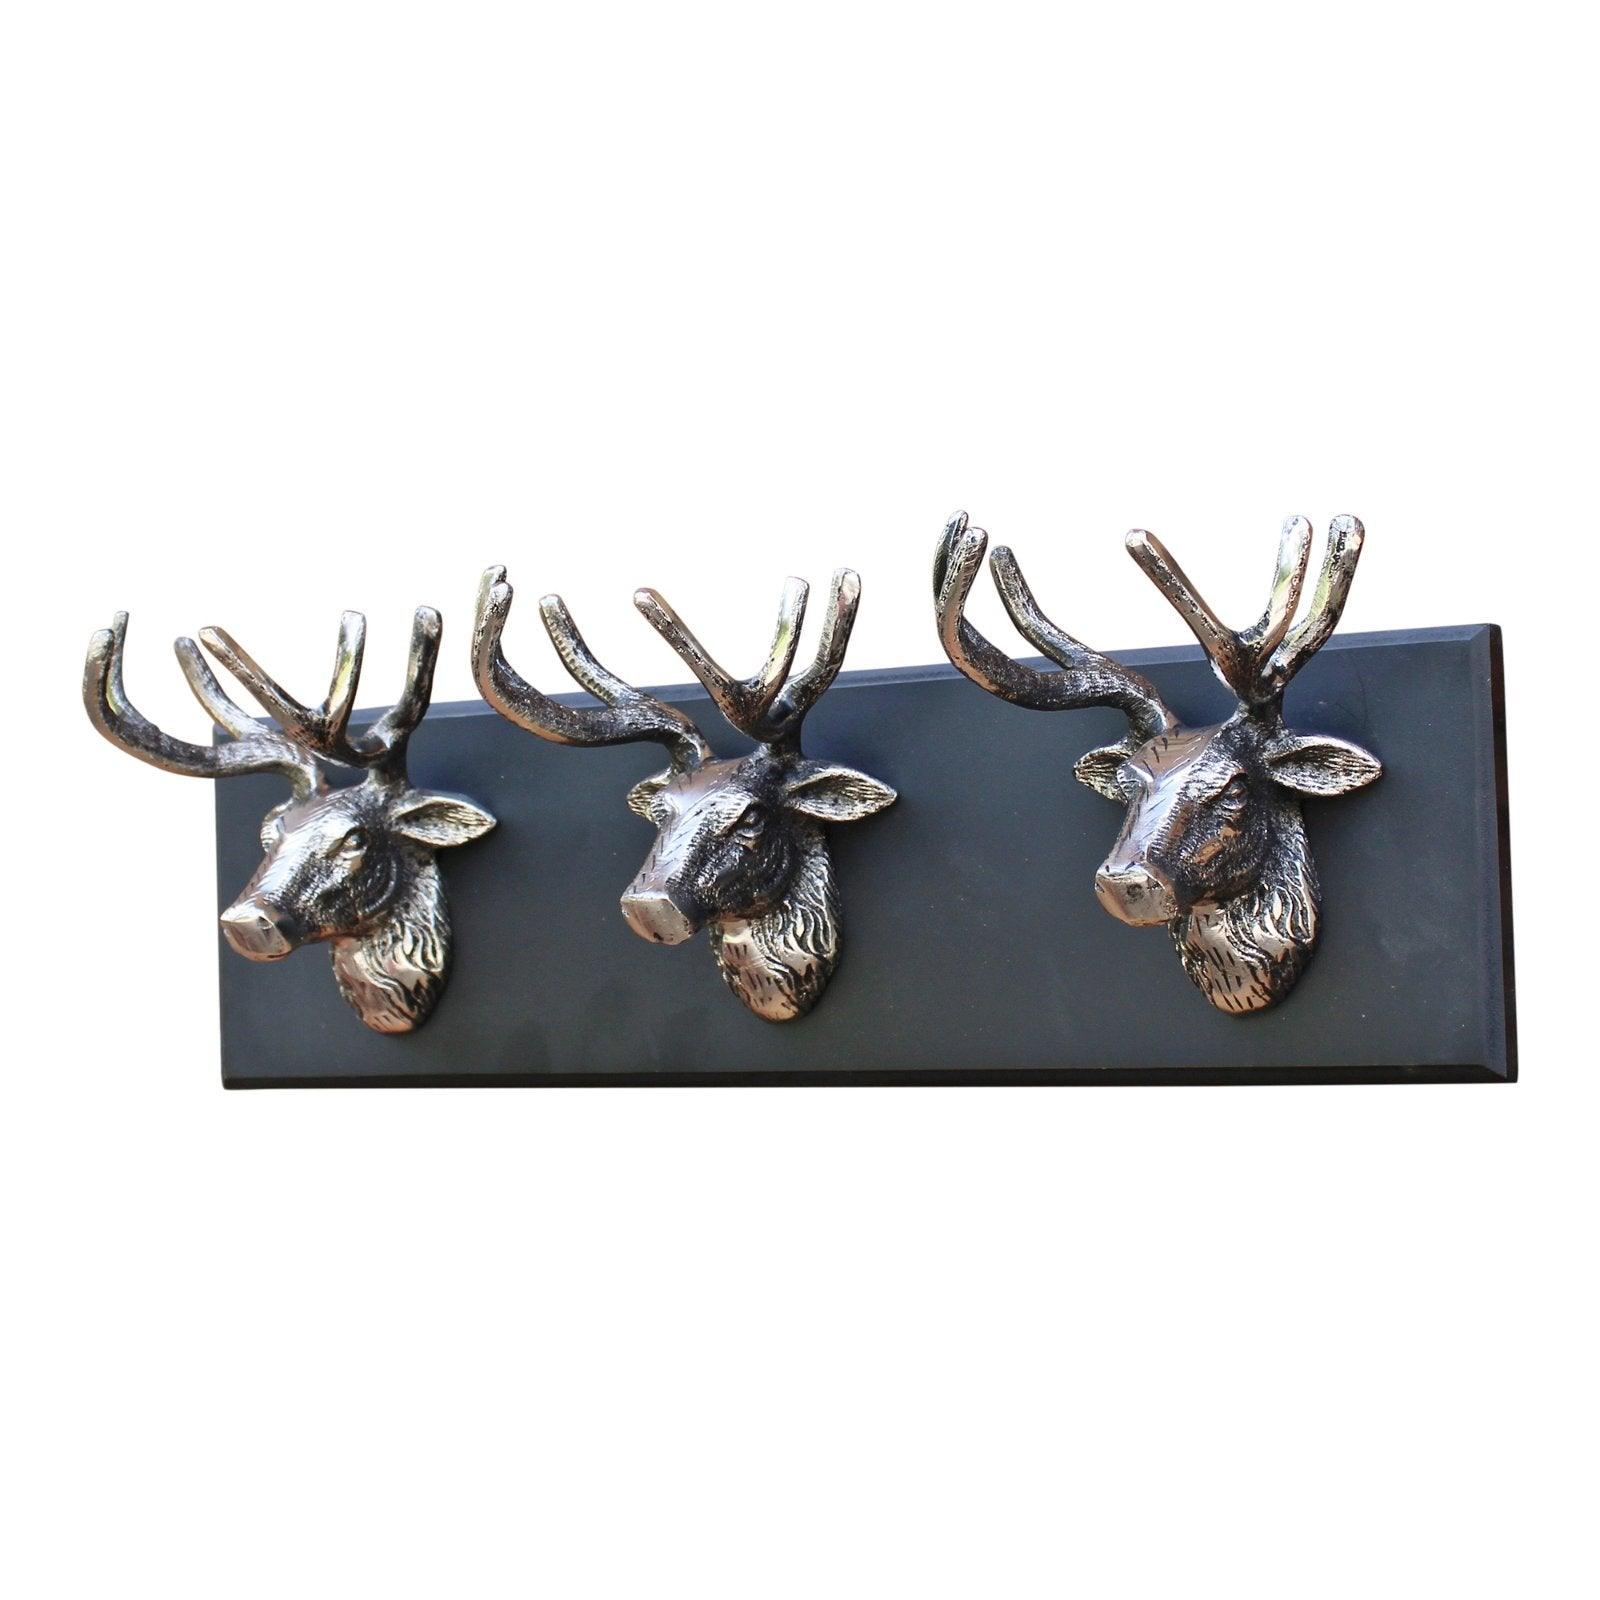 Wall Hanging Triple Stag Head Ornament - £35.99 - Animals 